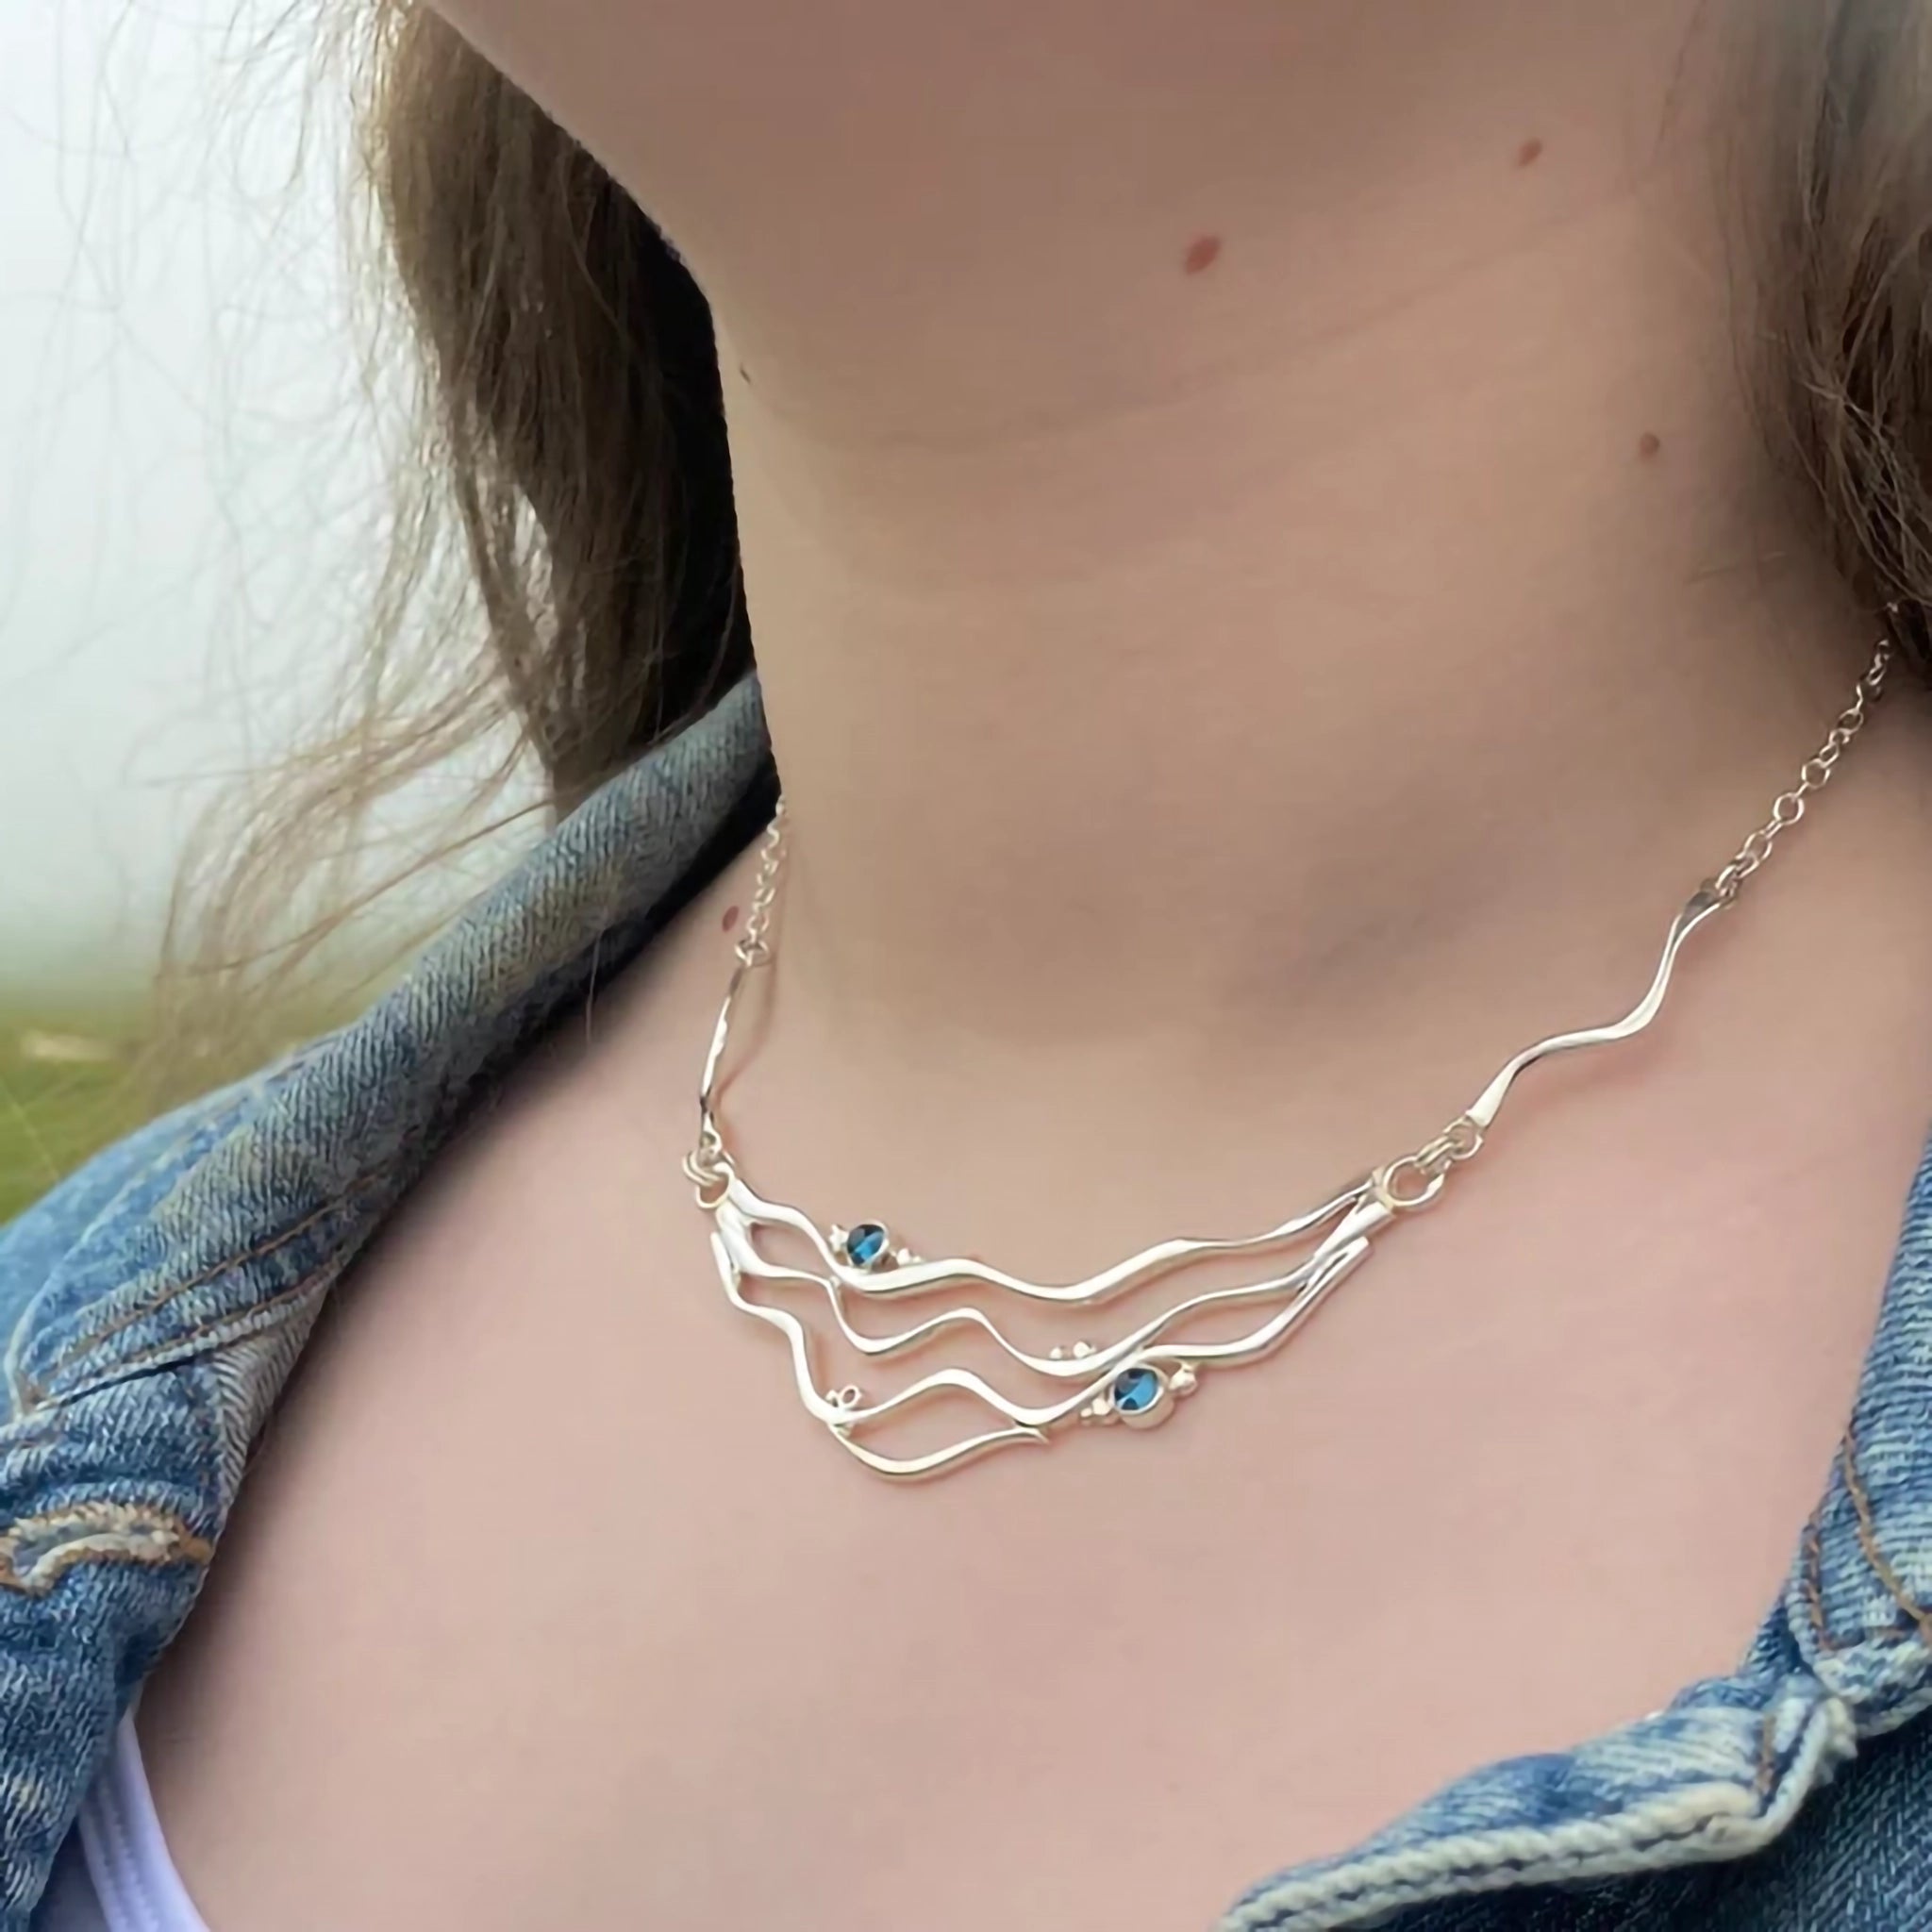 Model wearing a silver necklet featuring 4 ripple patterns and two blue topaz stones